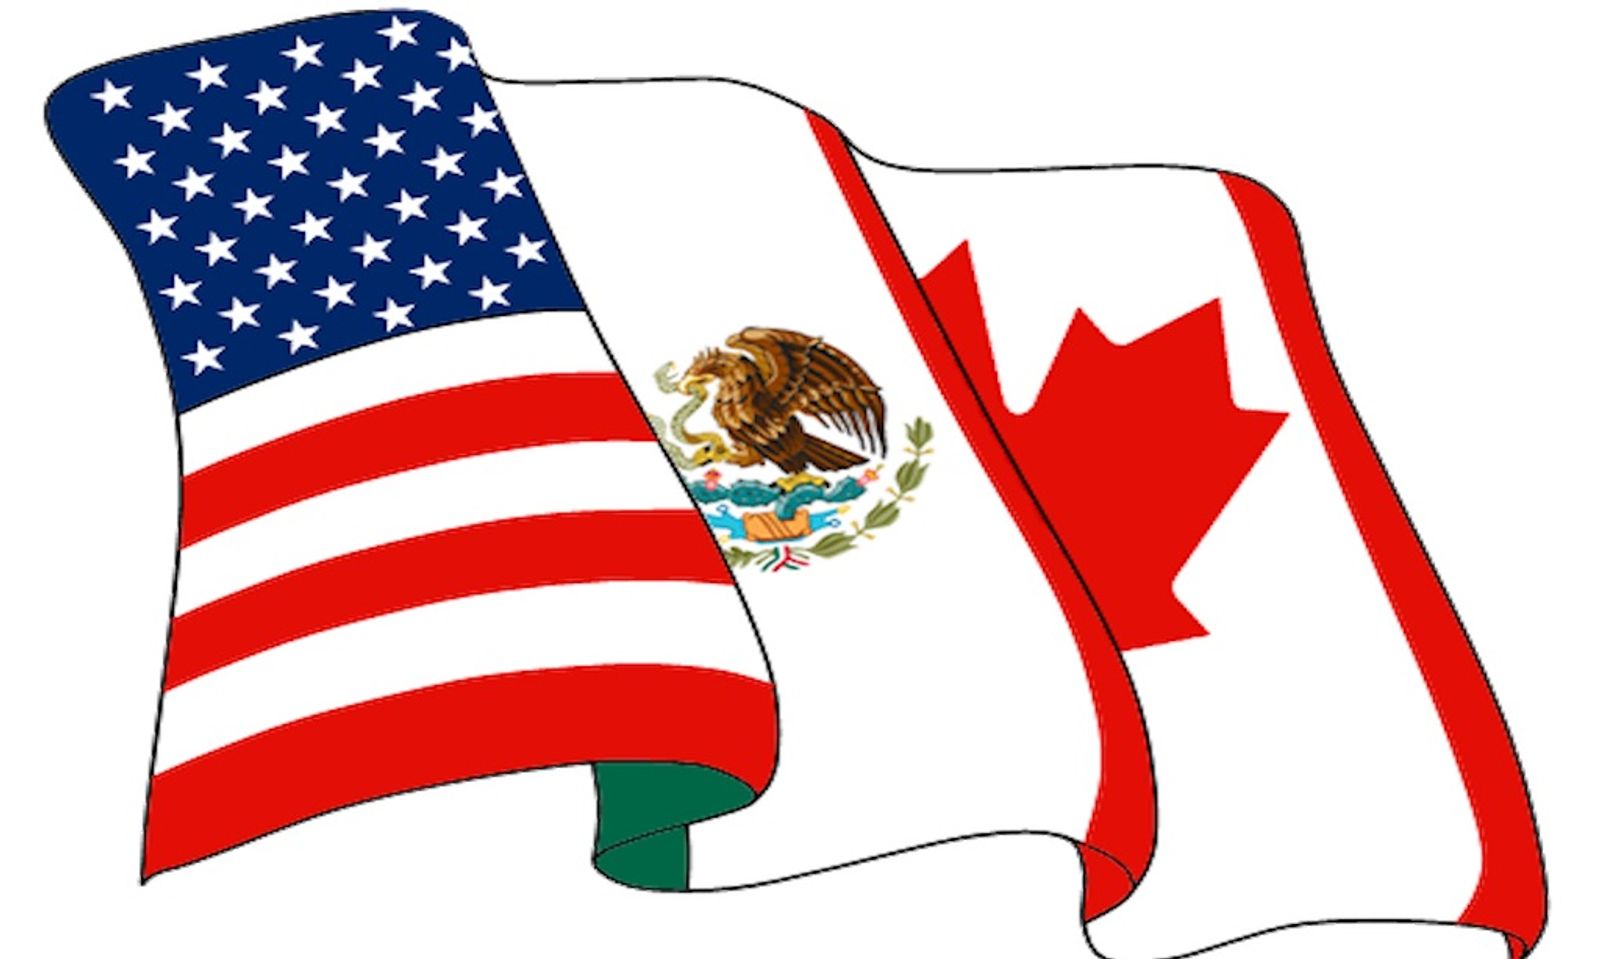 New NAFTA Trade Deal Misses Chance To Nullify FOSTA Law, EFF Says